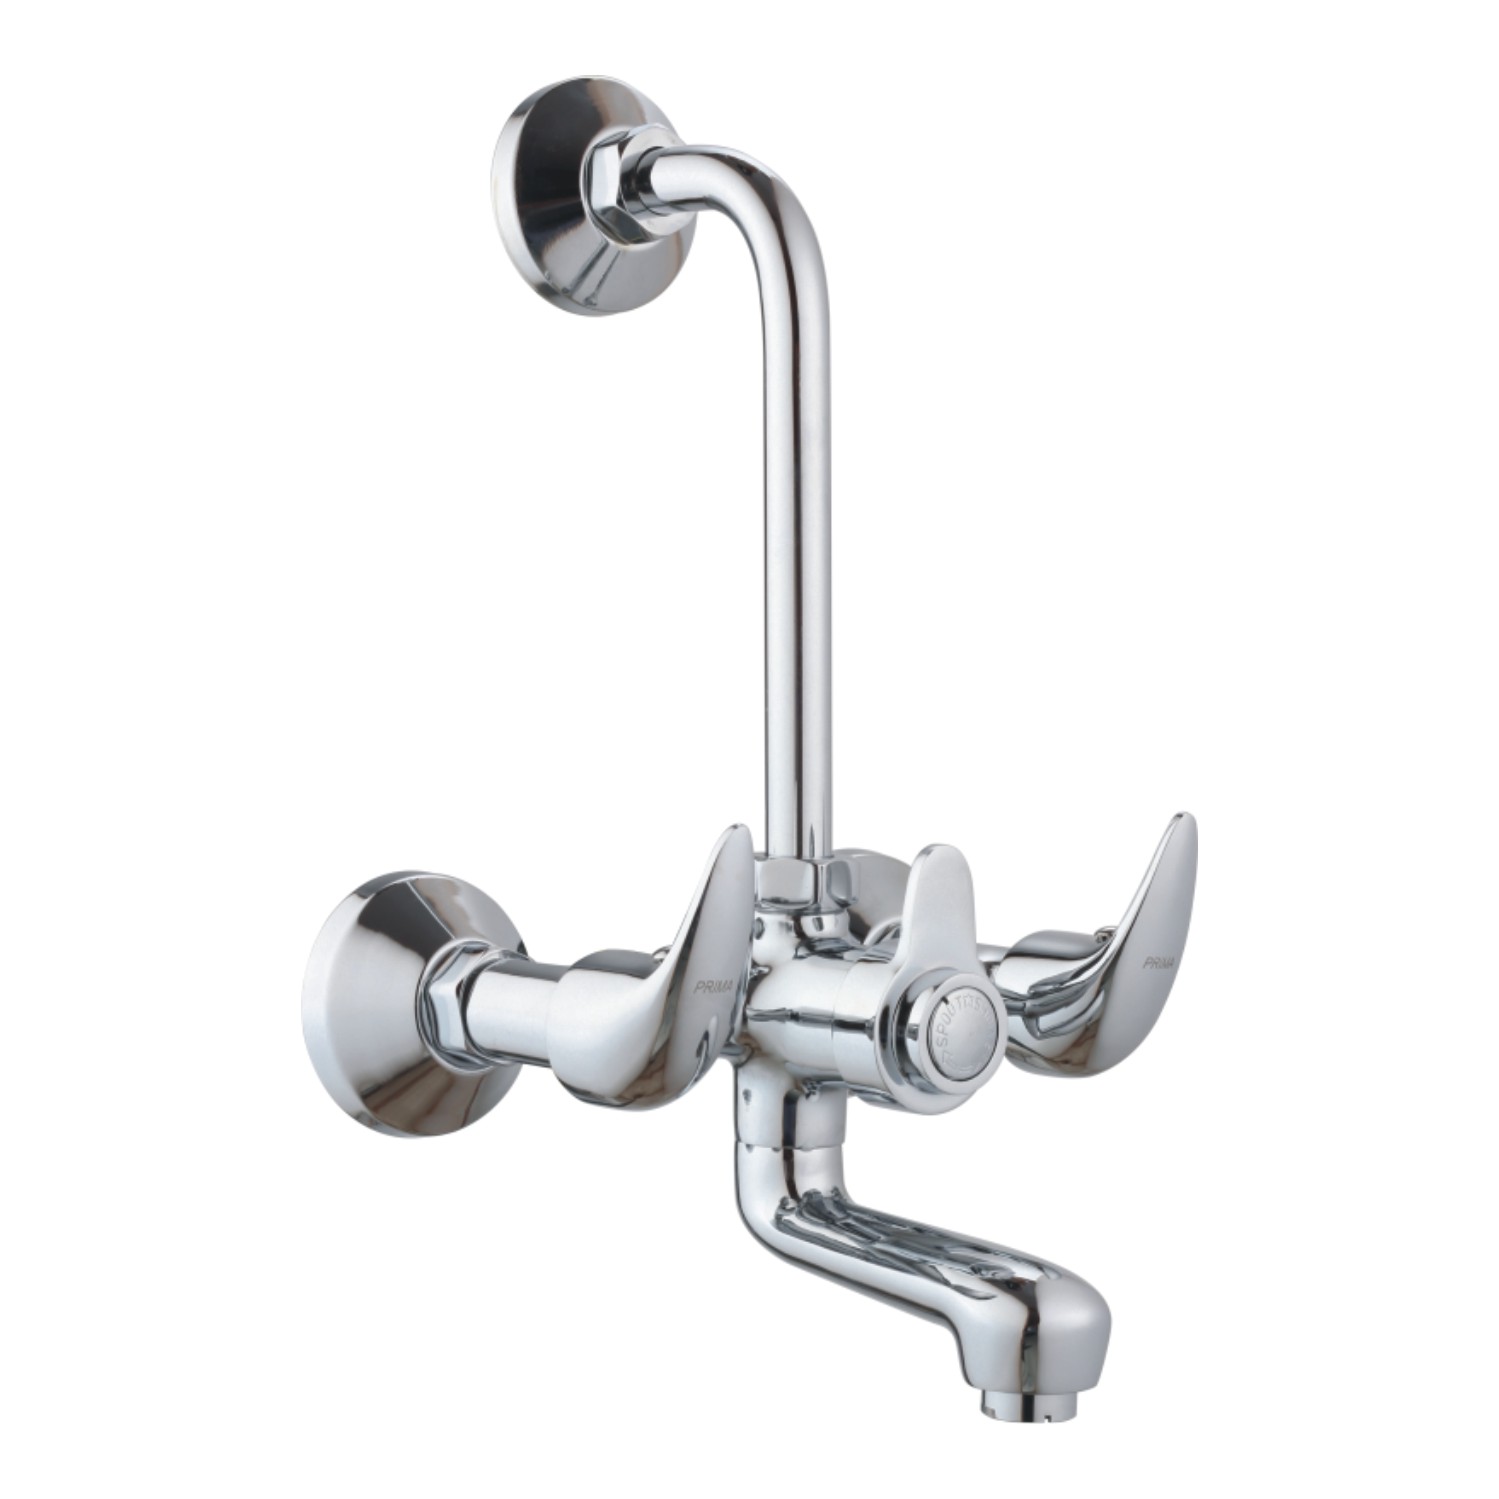 C.P WALL MIXER TELEPHONIC WITH L BEND SET 